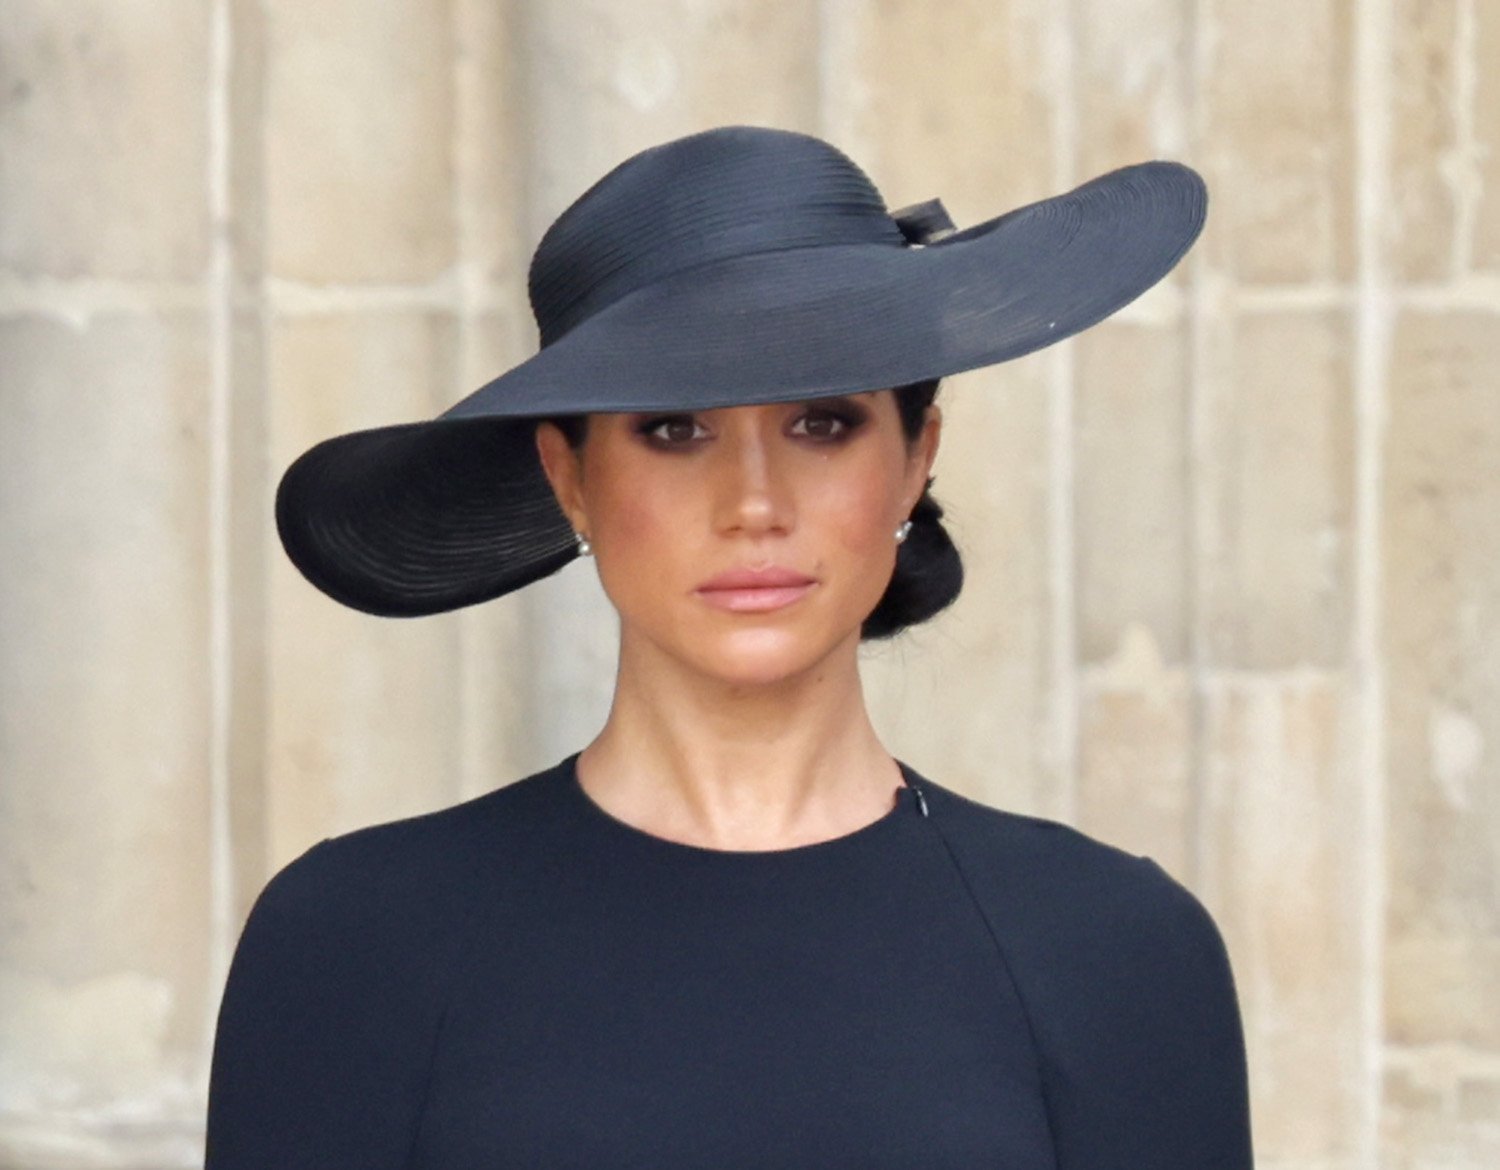 Meghan Markle’s Body Language at Queen’s Funeral Was ‘Understated,’ Expert Says